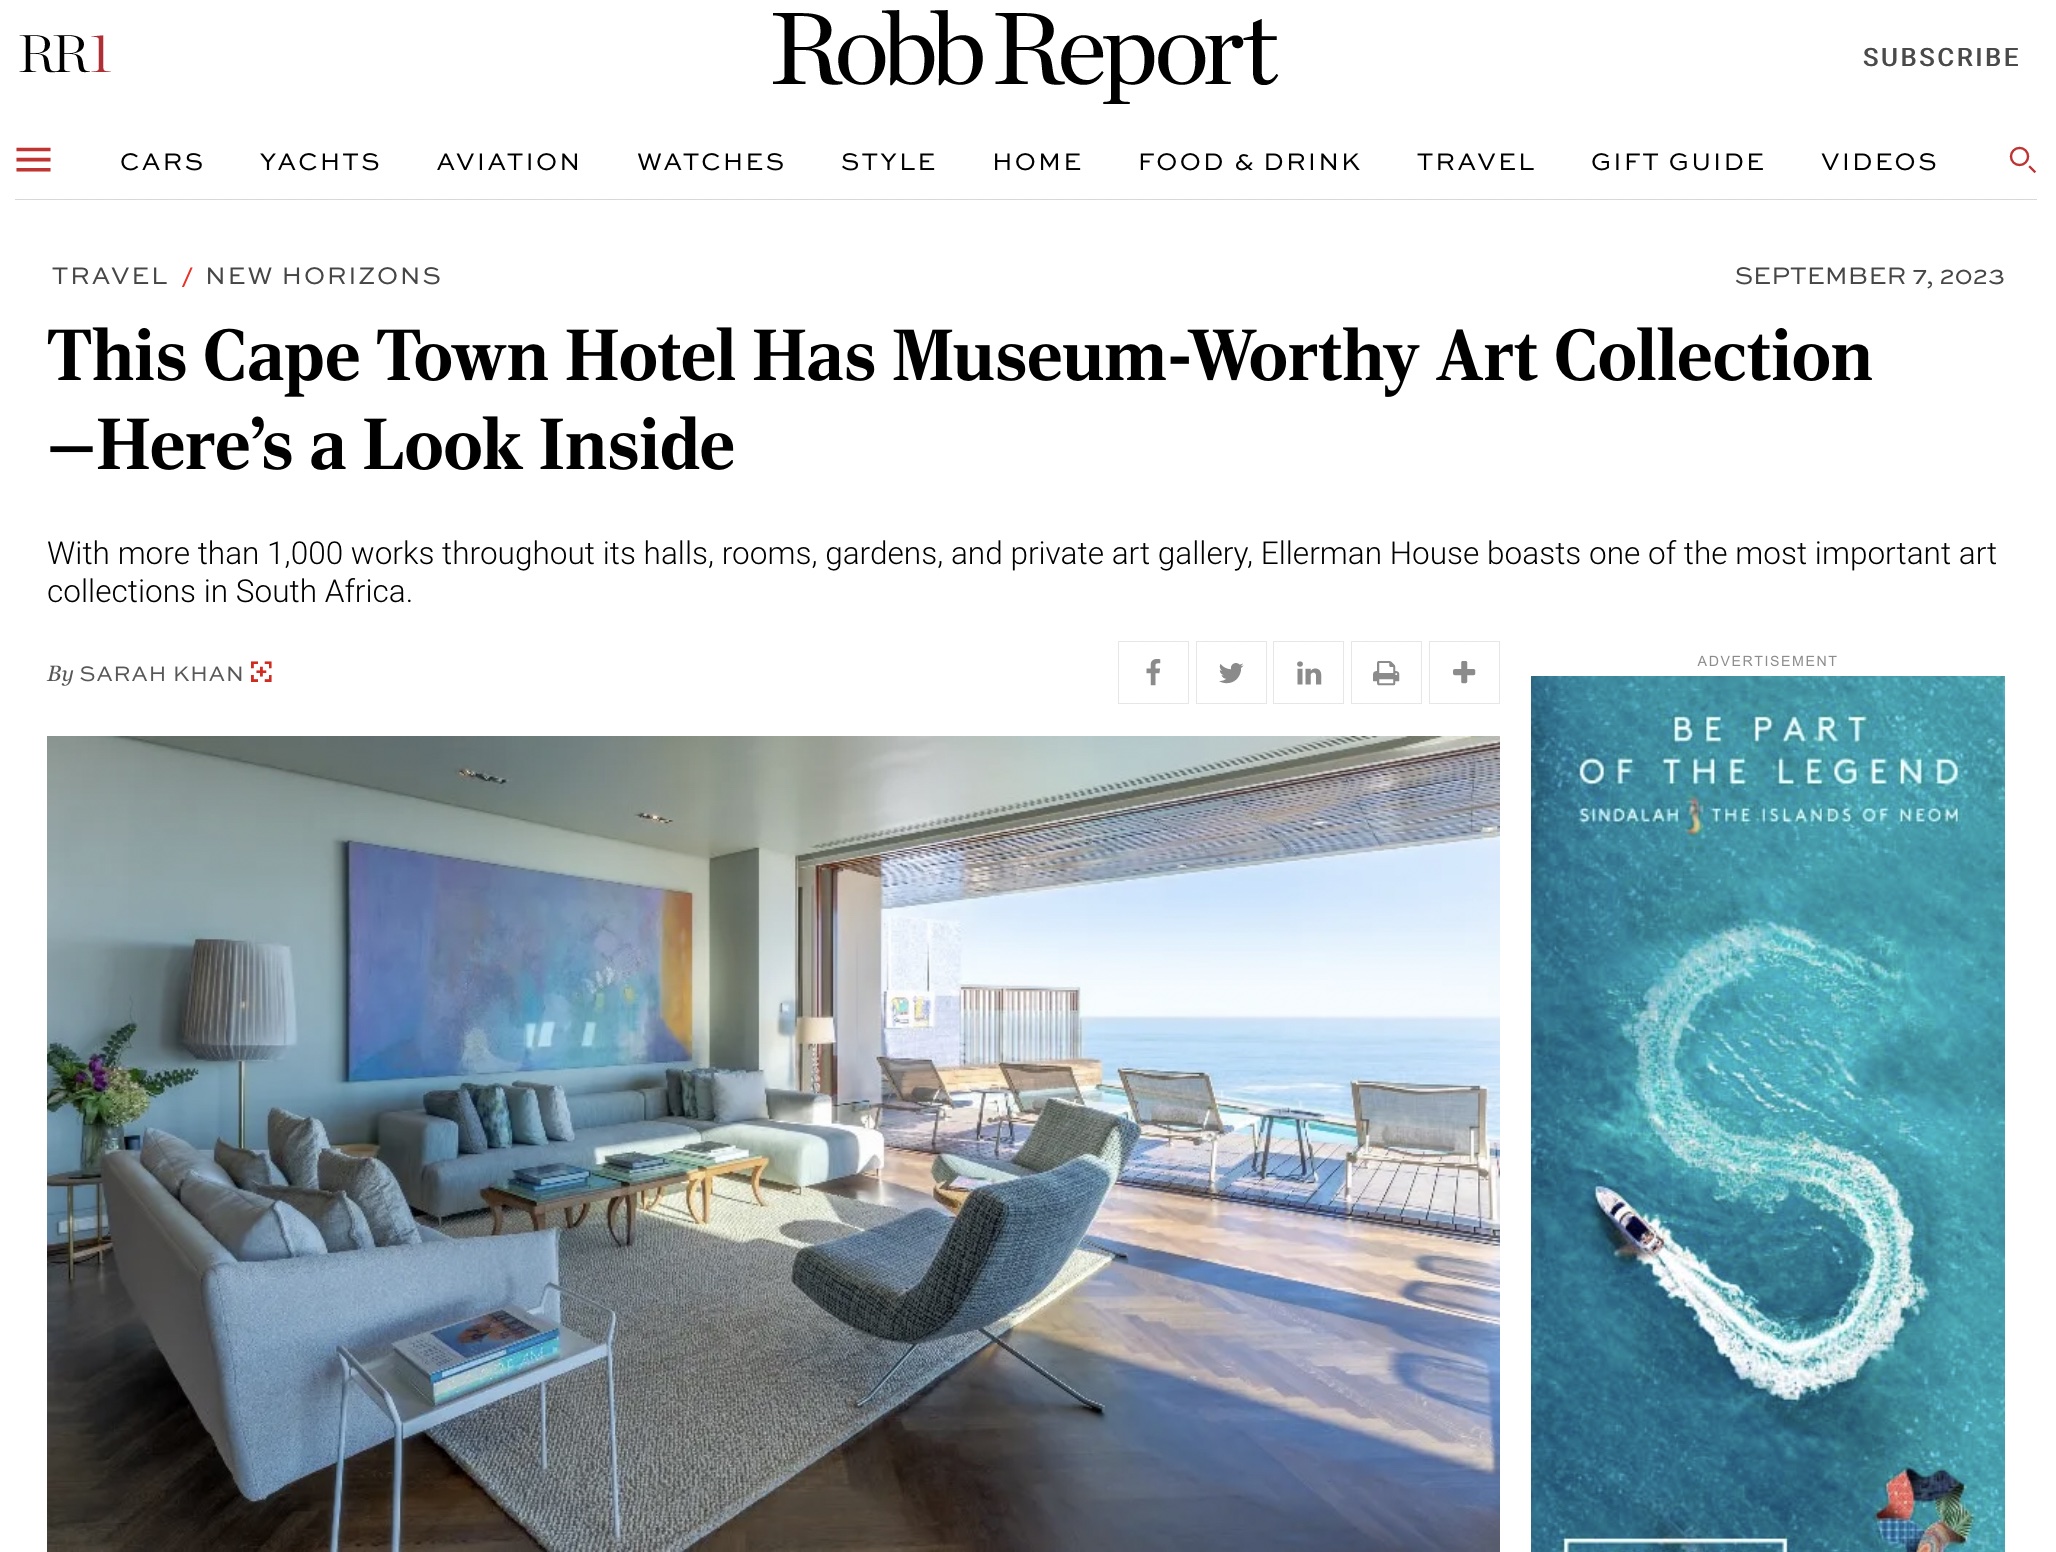 Robb Report: This Cape Town Hotel Has Museum-Worthy Art Collection—Here’s a Look Inside